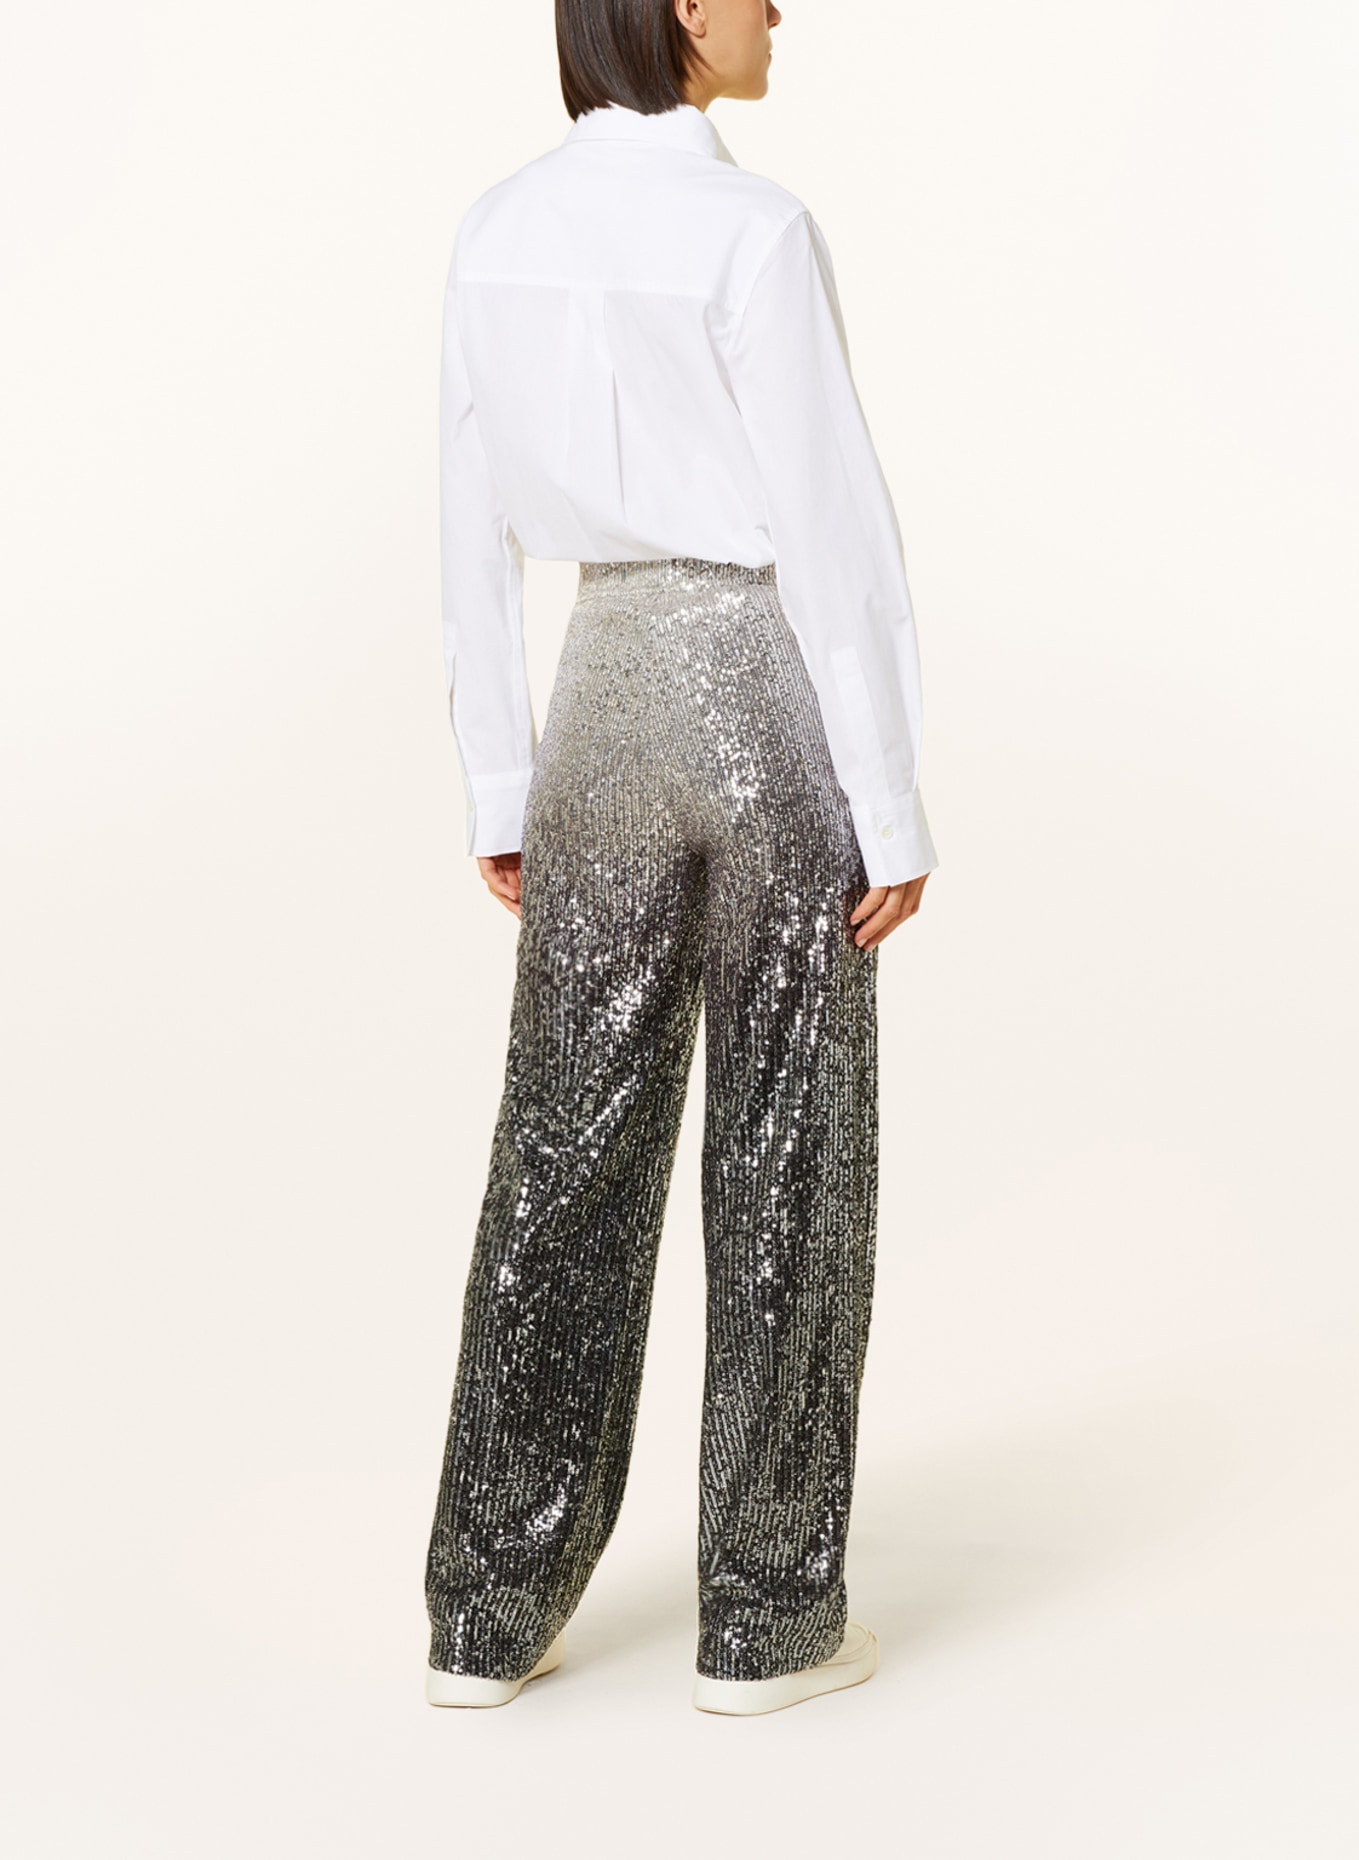 CAMBIO Trousers AVRIL with sequins, Color: GRAY/ BLACK/ SILVER (Image 3)